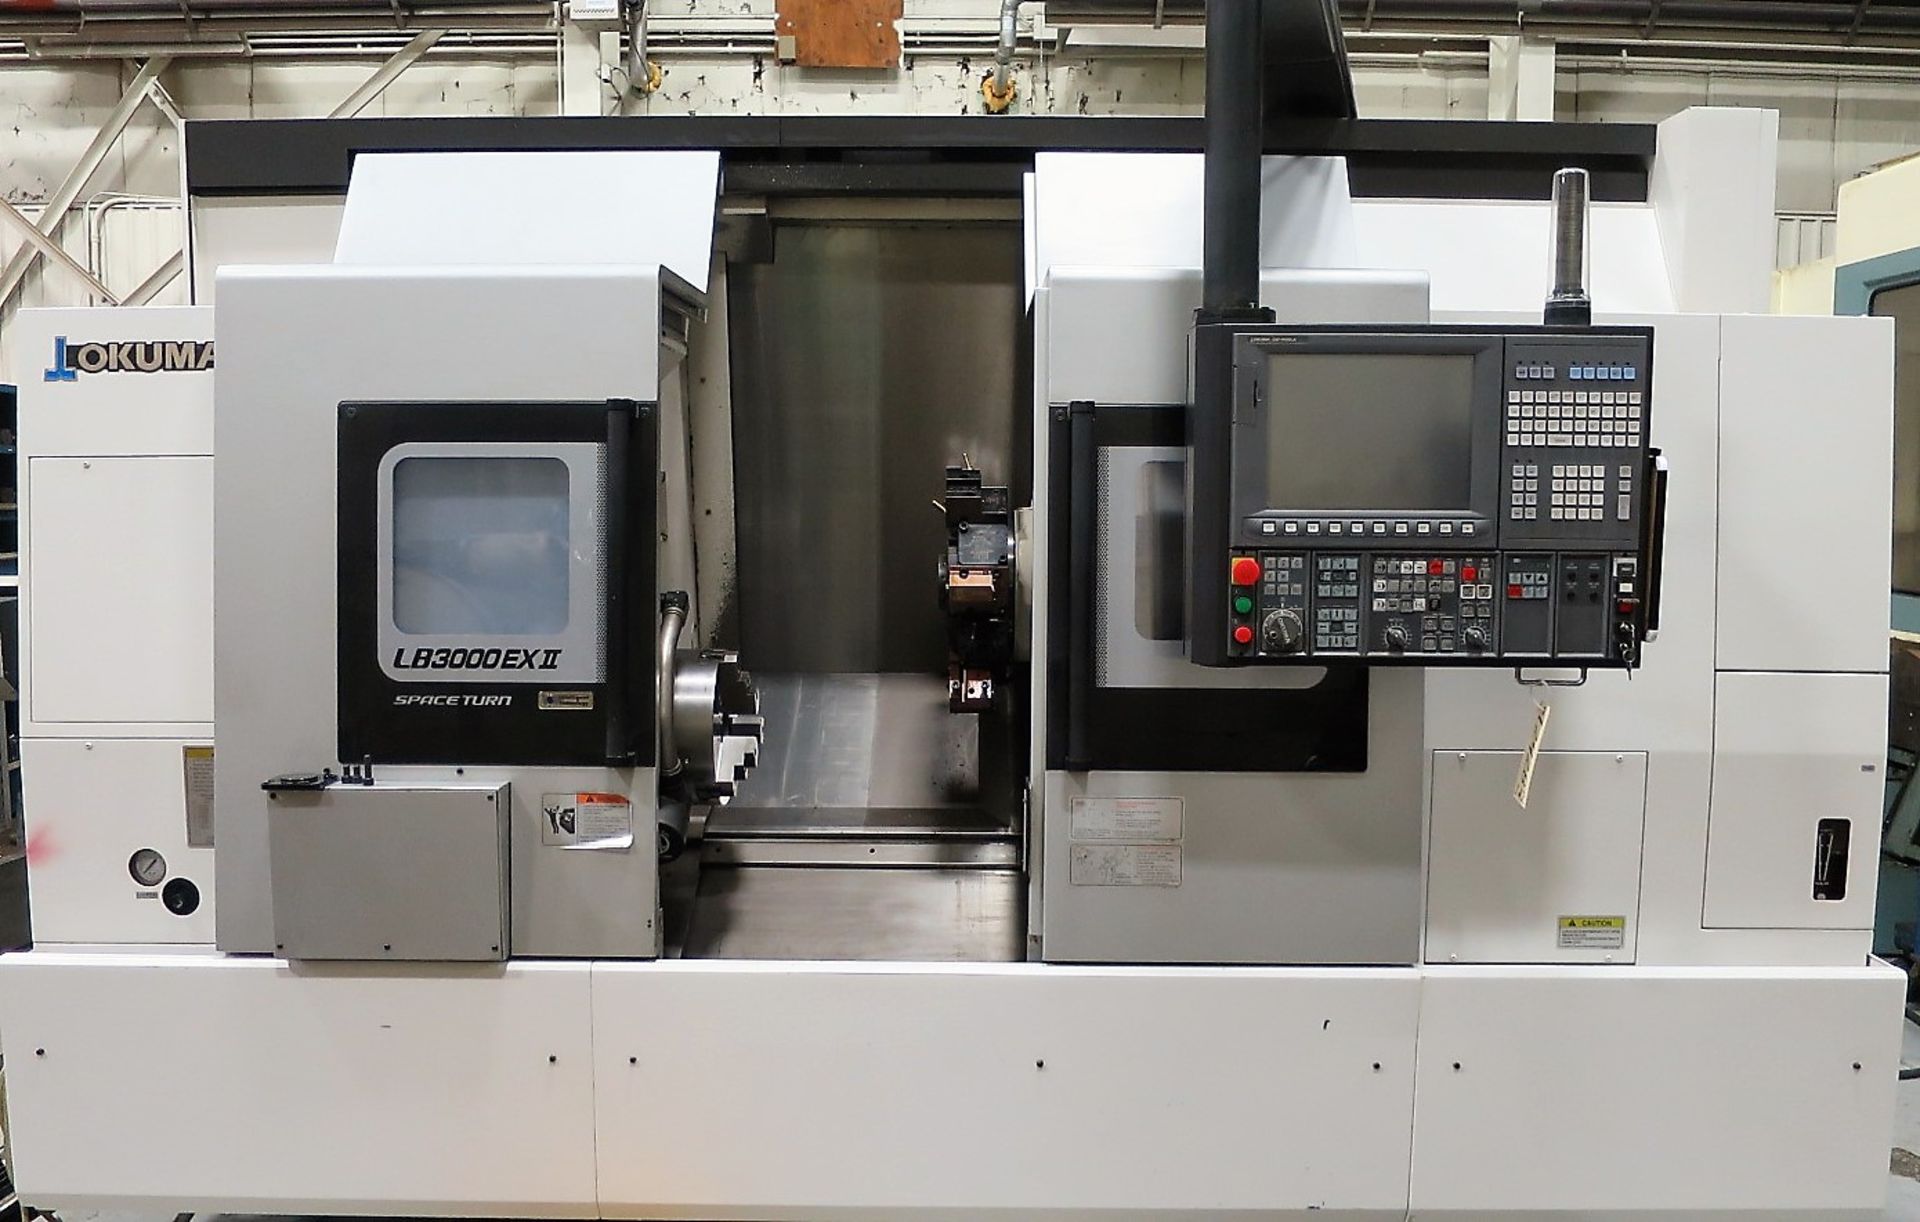 Okuma LB3000EXII MY BB 950 CNC Turning Center Lathe W/Live Tooling & Y-Axis Milling, S/N 206472,